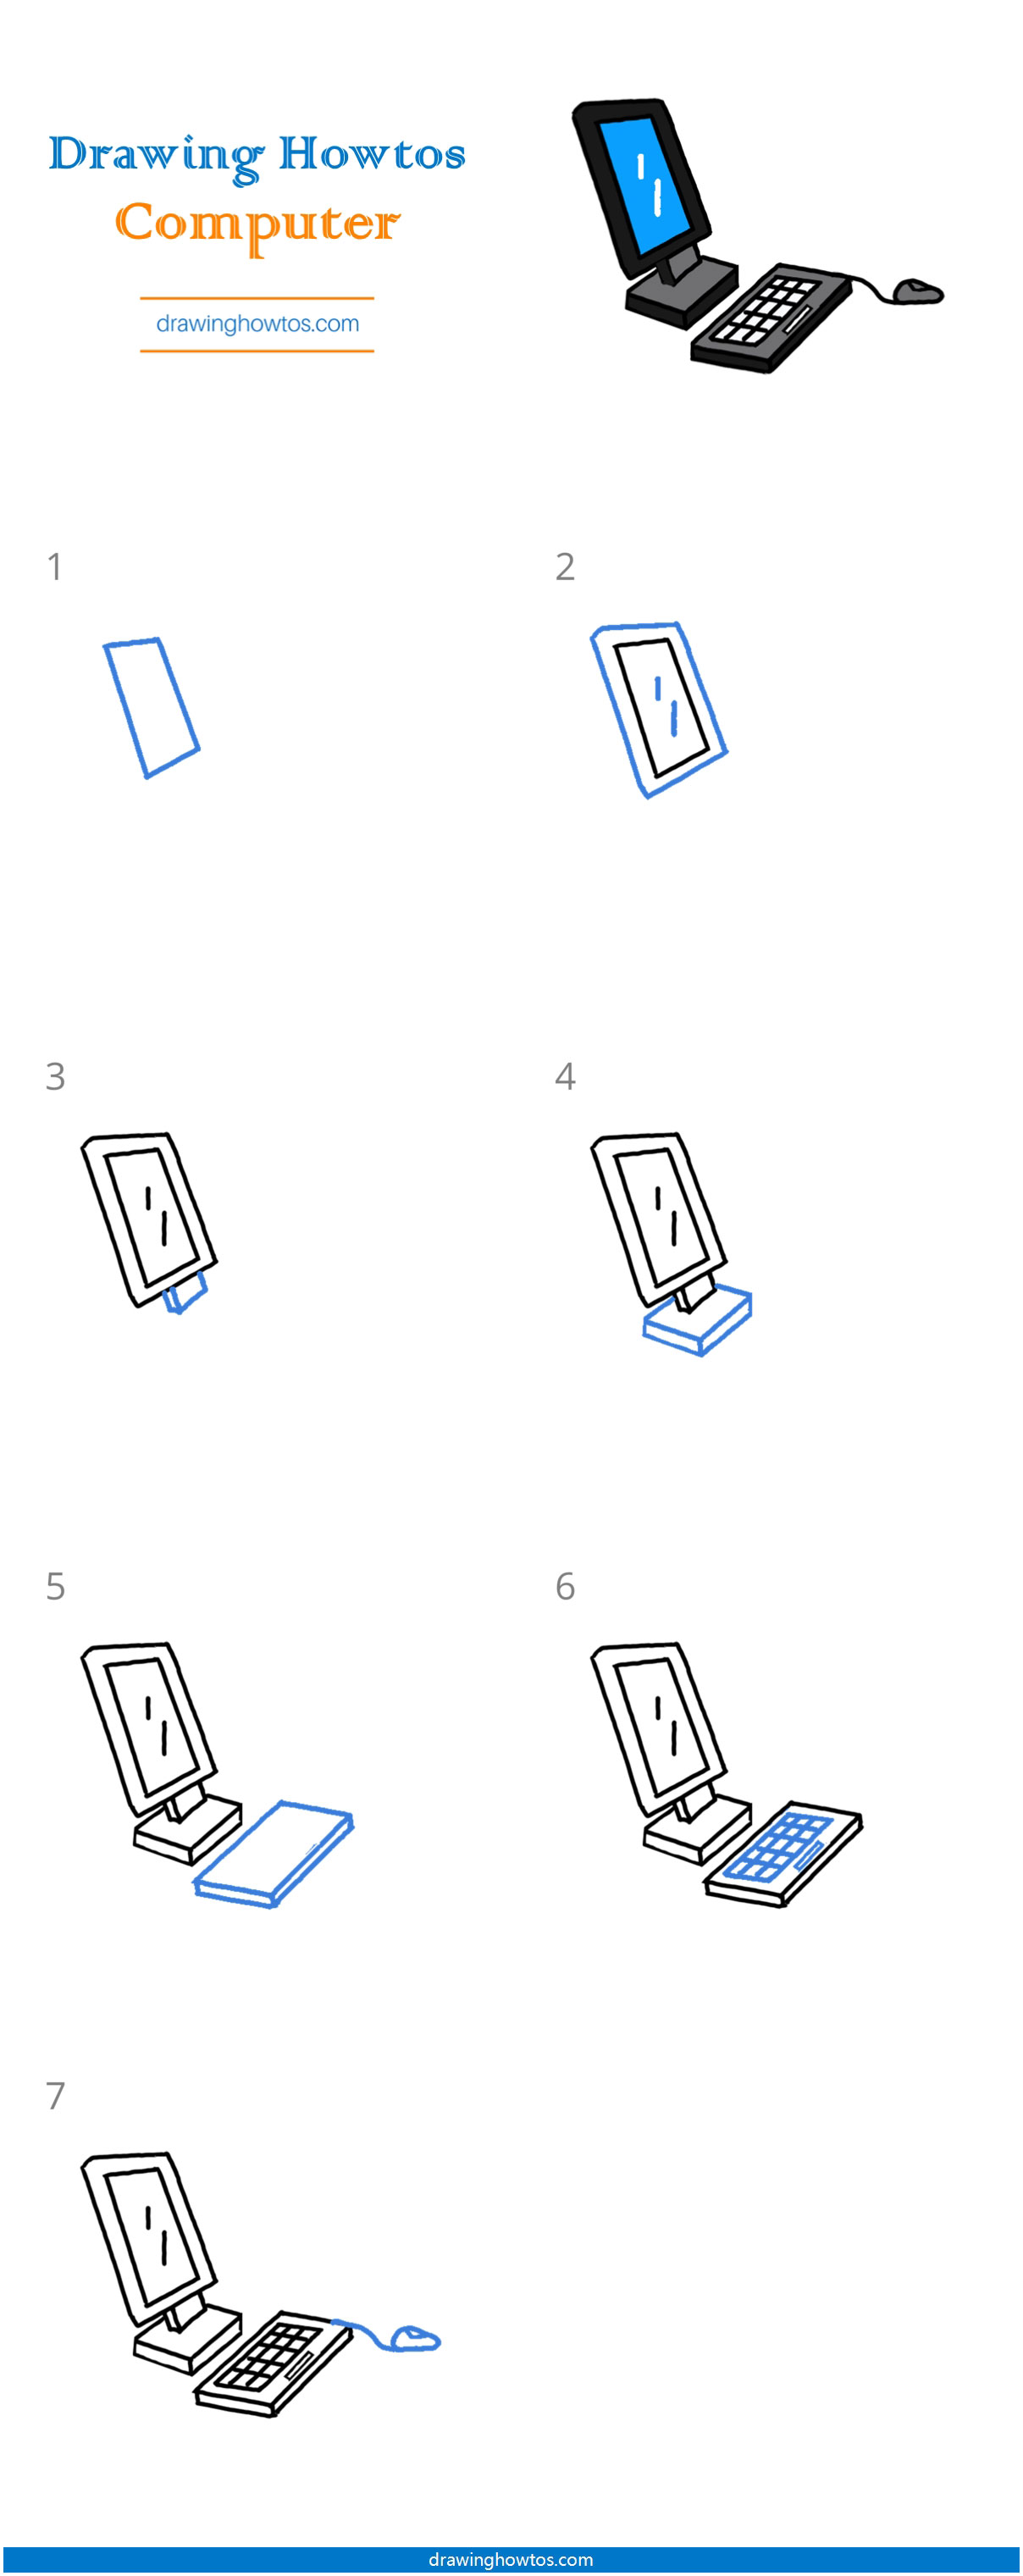 How to Draw a Computer Step by Step